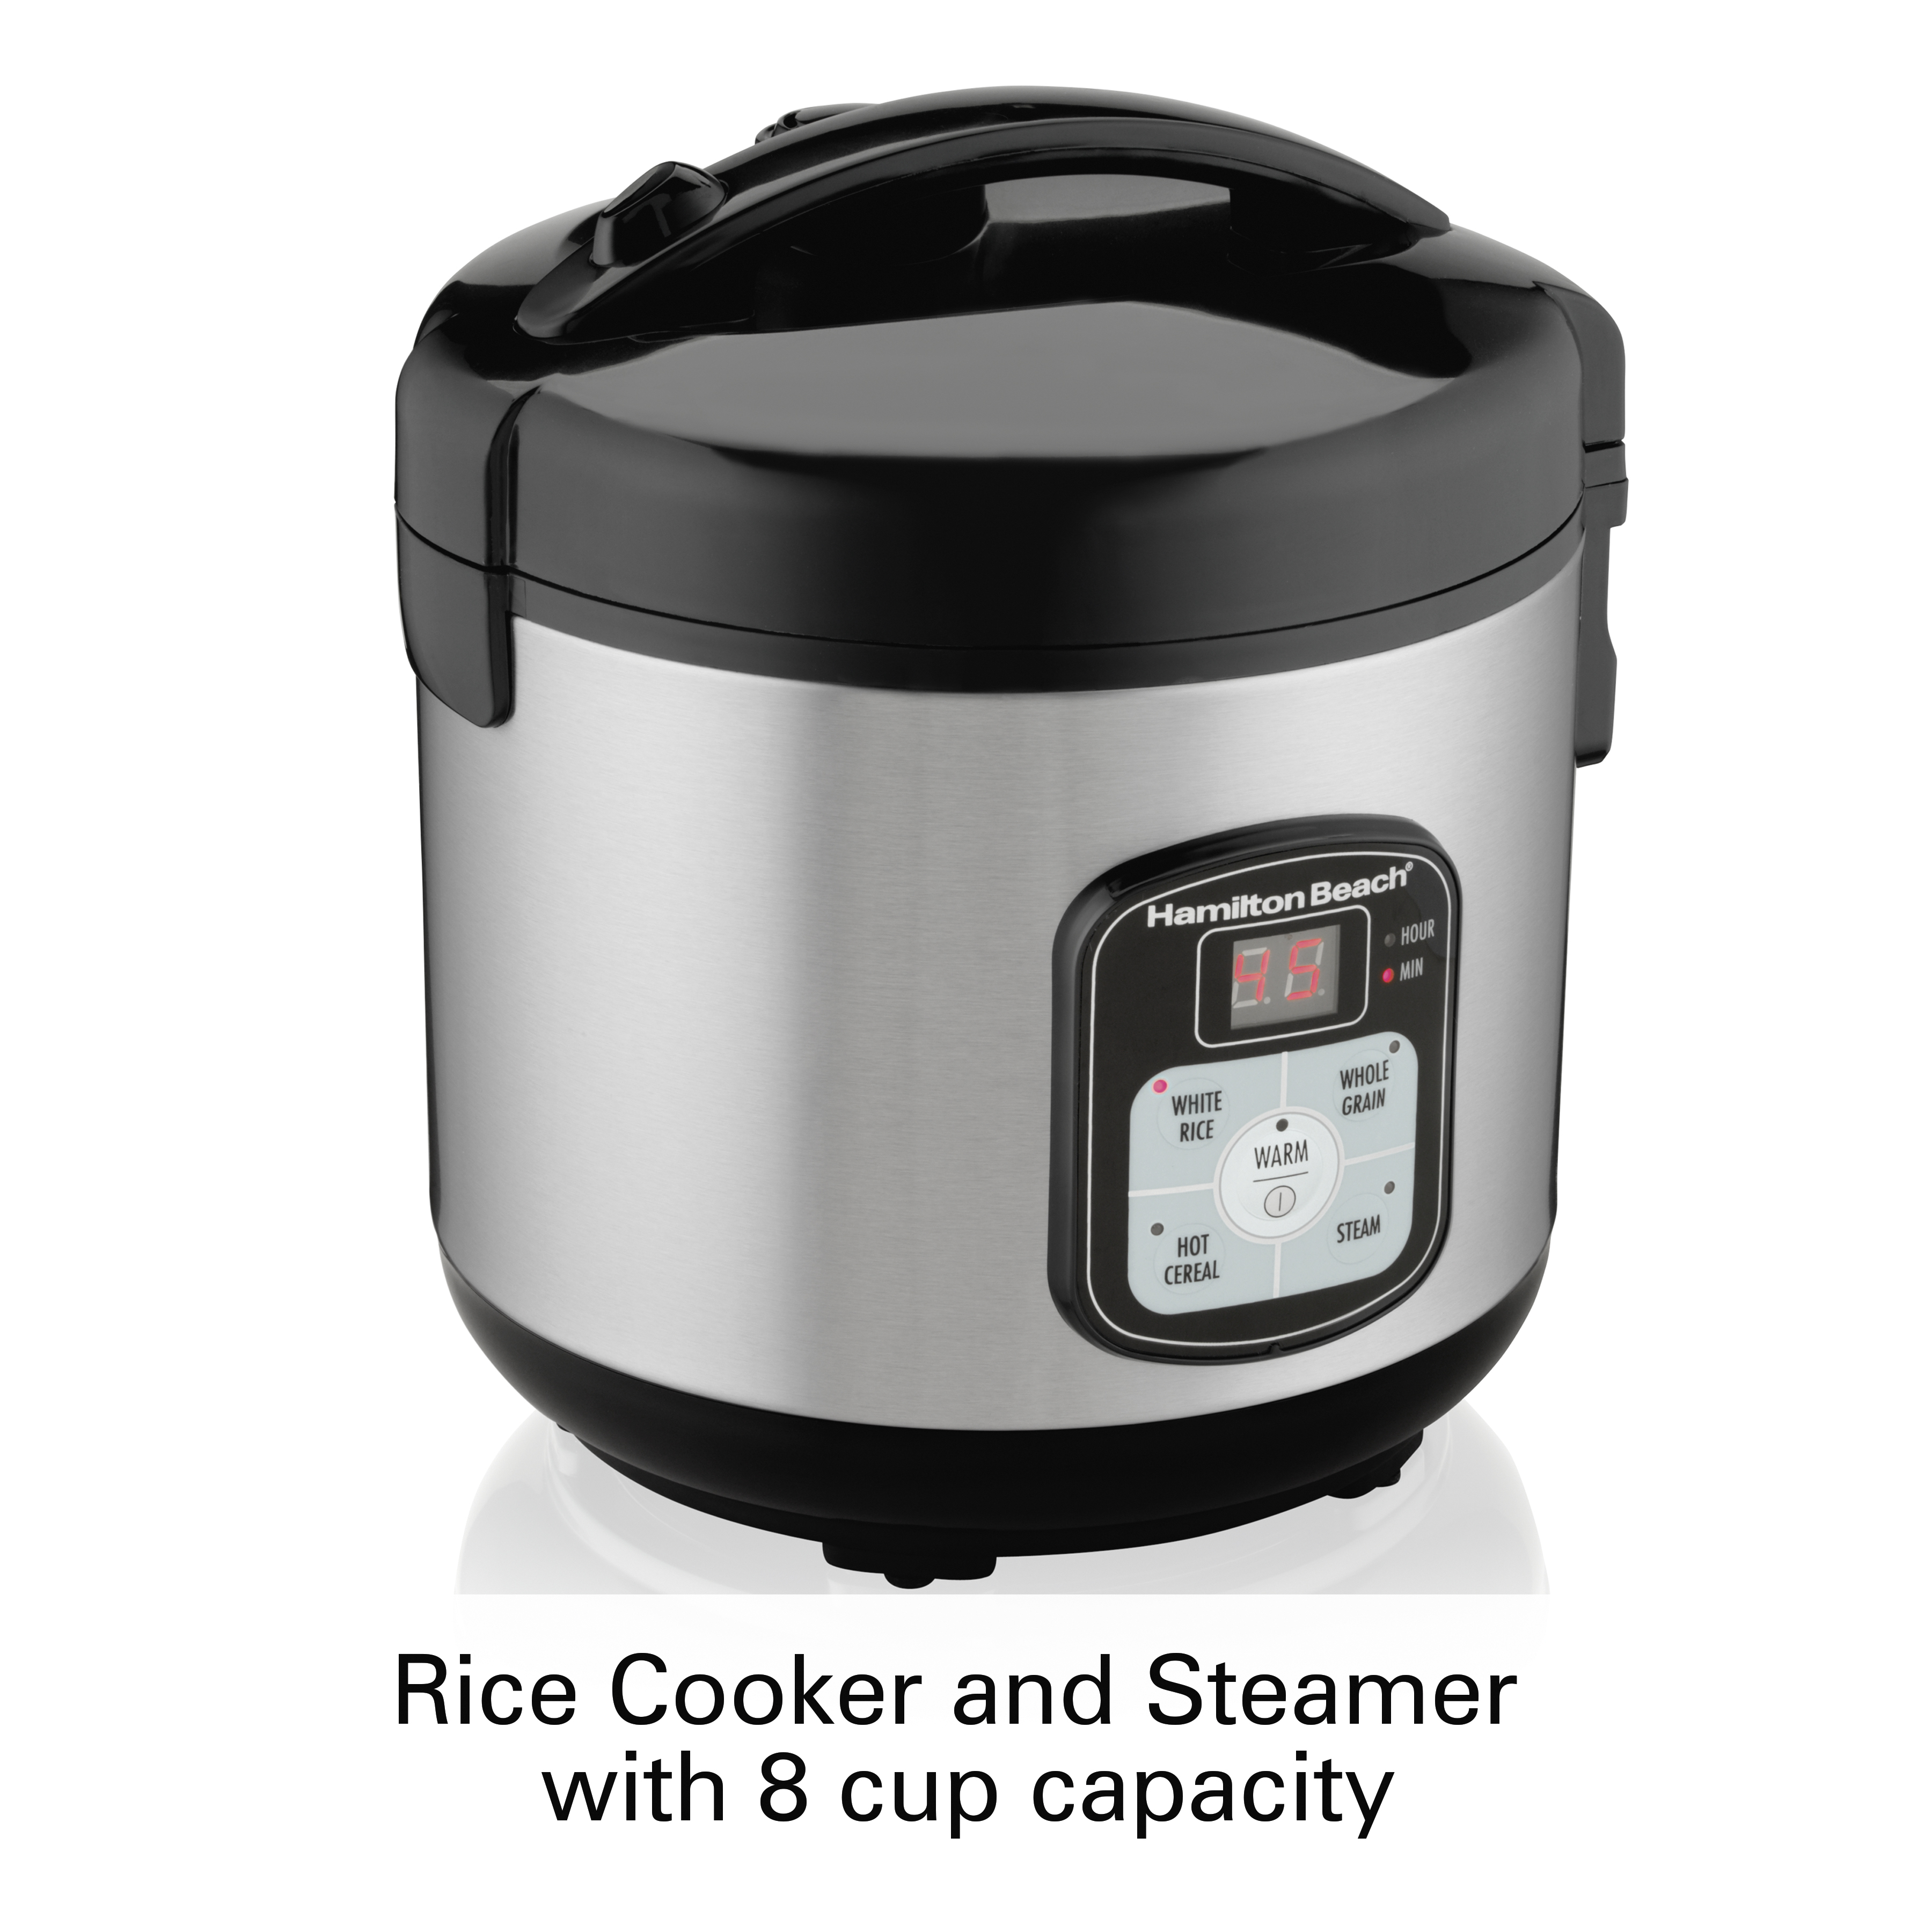 Hamilton Beach Rice Cooker & Food Steamer, Digital Programmable, 8 Cups Cooked (4 Uncooked), Steam & Rinse Basket, Stainless Steel, 37519 - image 3 of 8